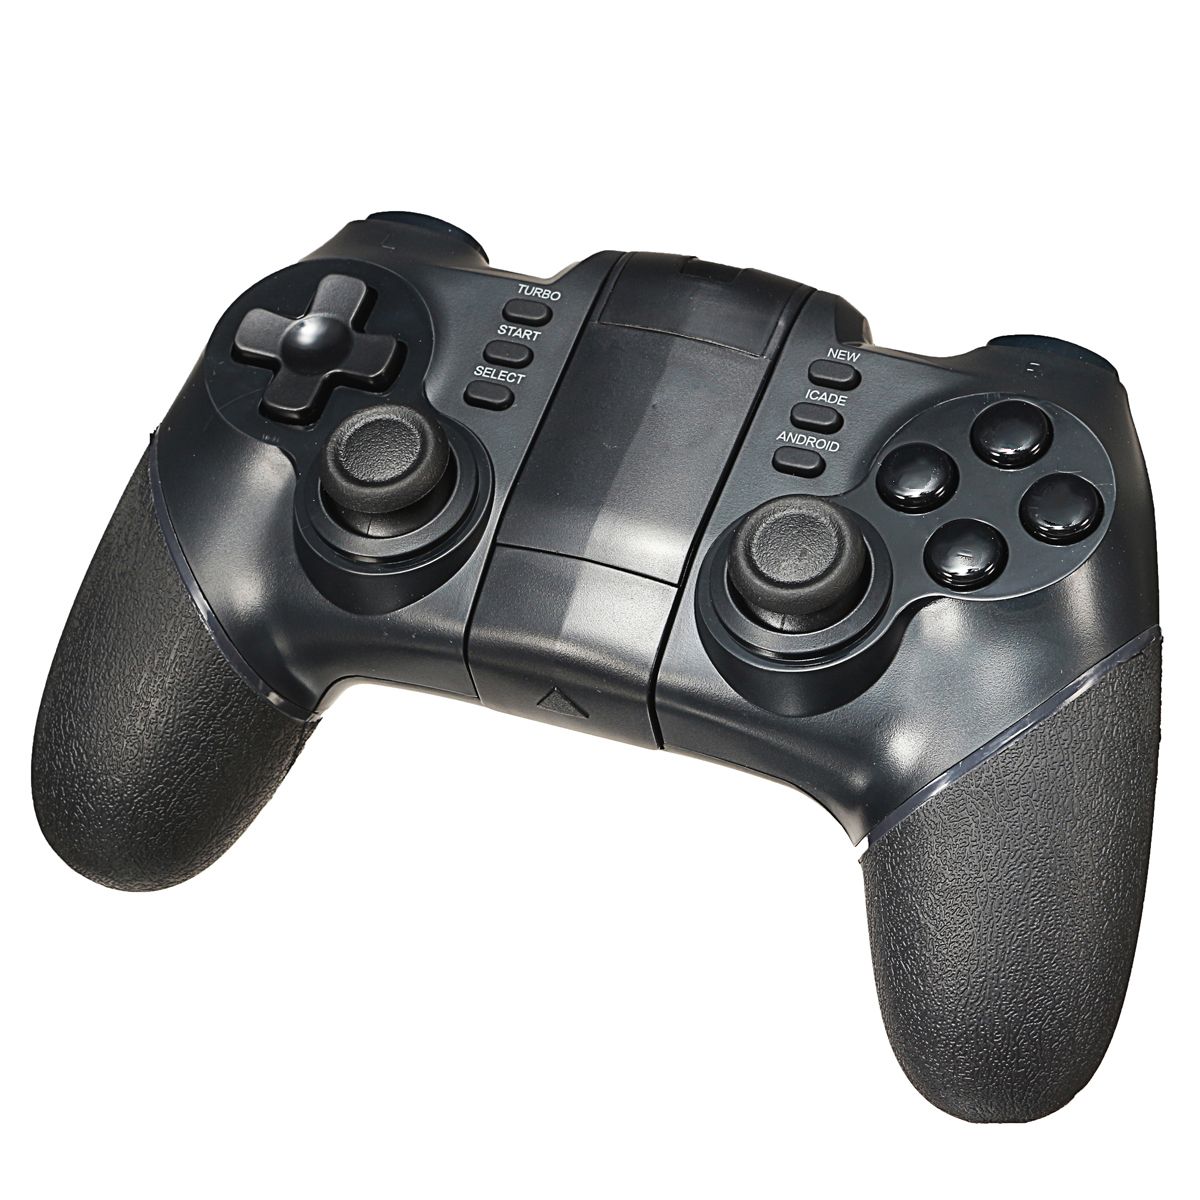 iPega-PG-9077-Gaming-bluetooth-Wireless-Controller-Gamepad-Joystick-for-Smartphone-iOS-Android-Win-X-1202735